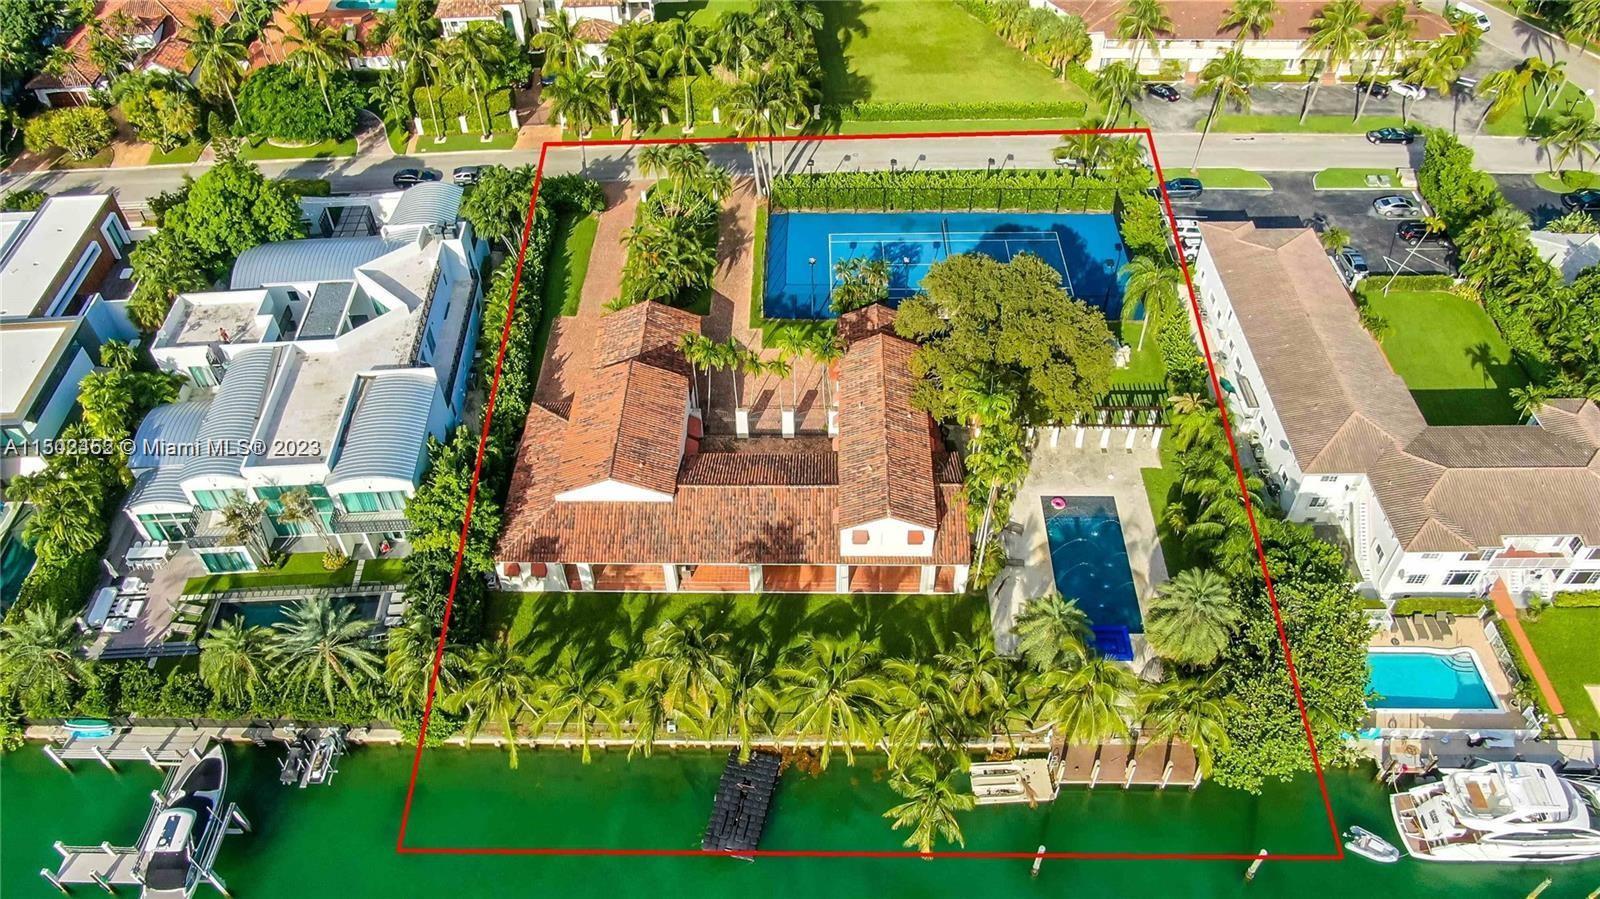 Do you want what NOBODY else has? How about a magnificent, one-of-a-kind Mega Mansion with 200 linea